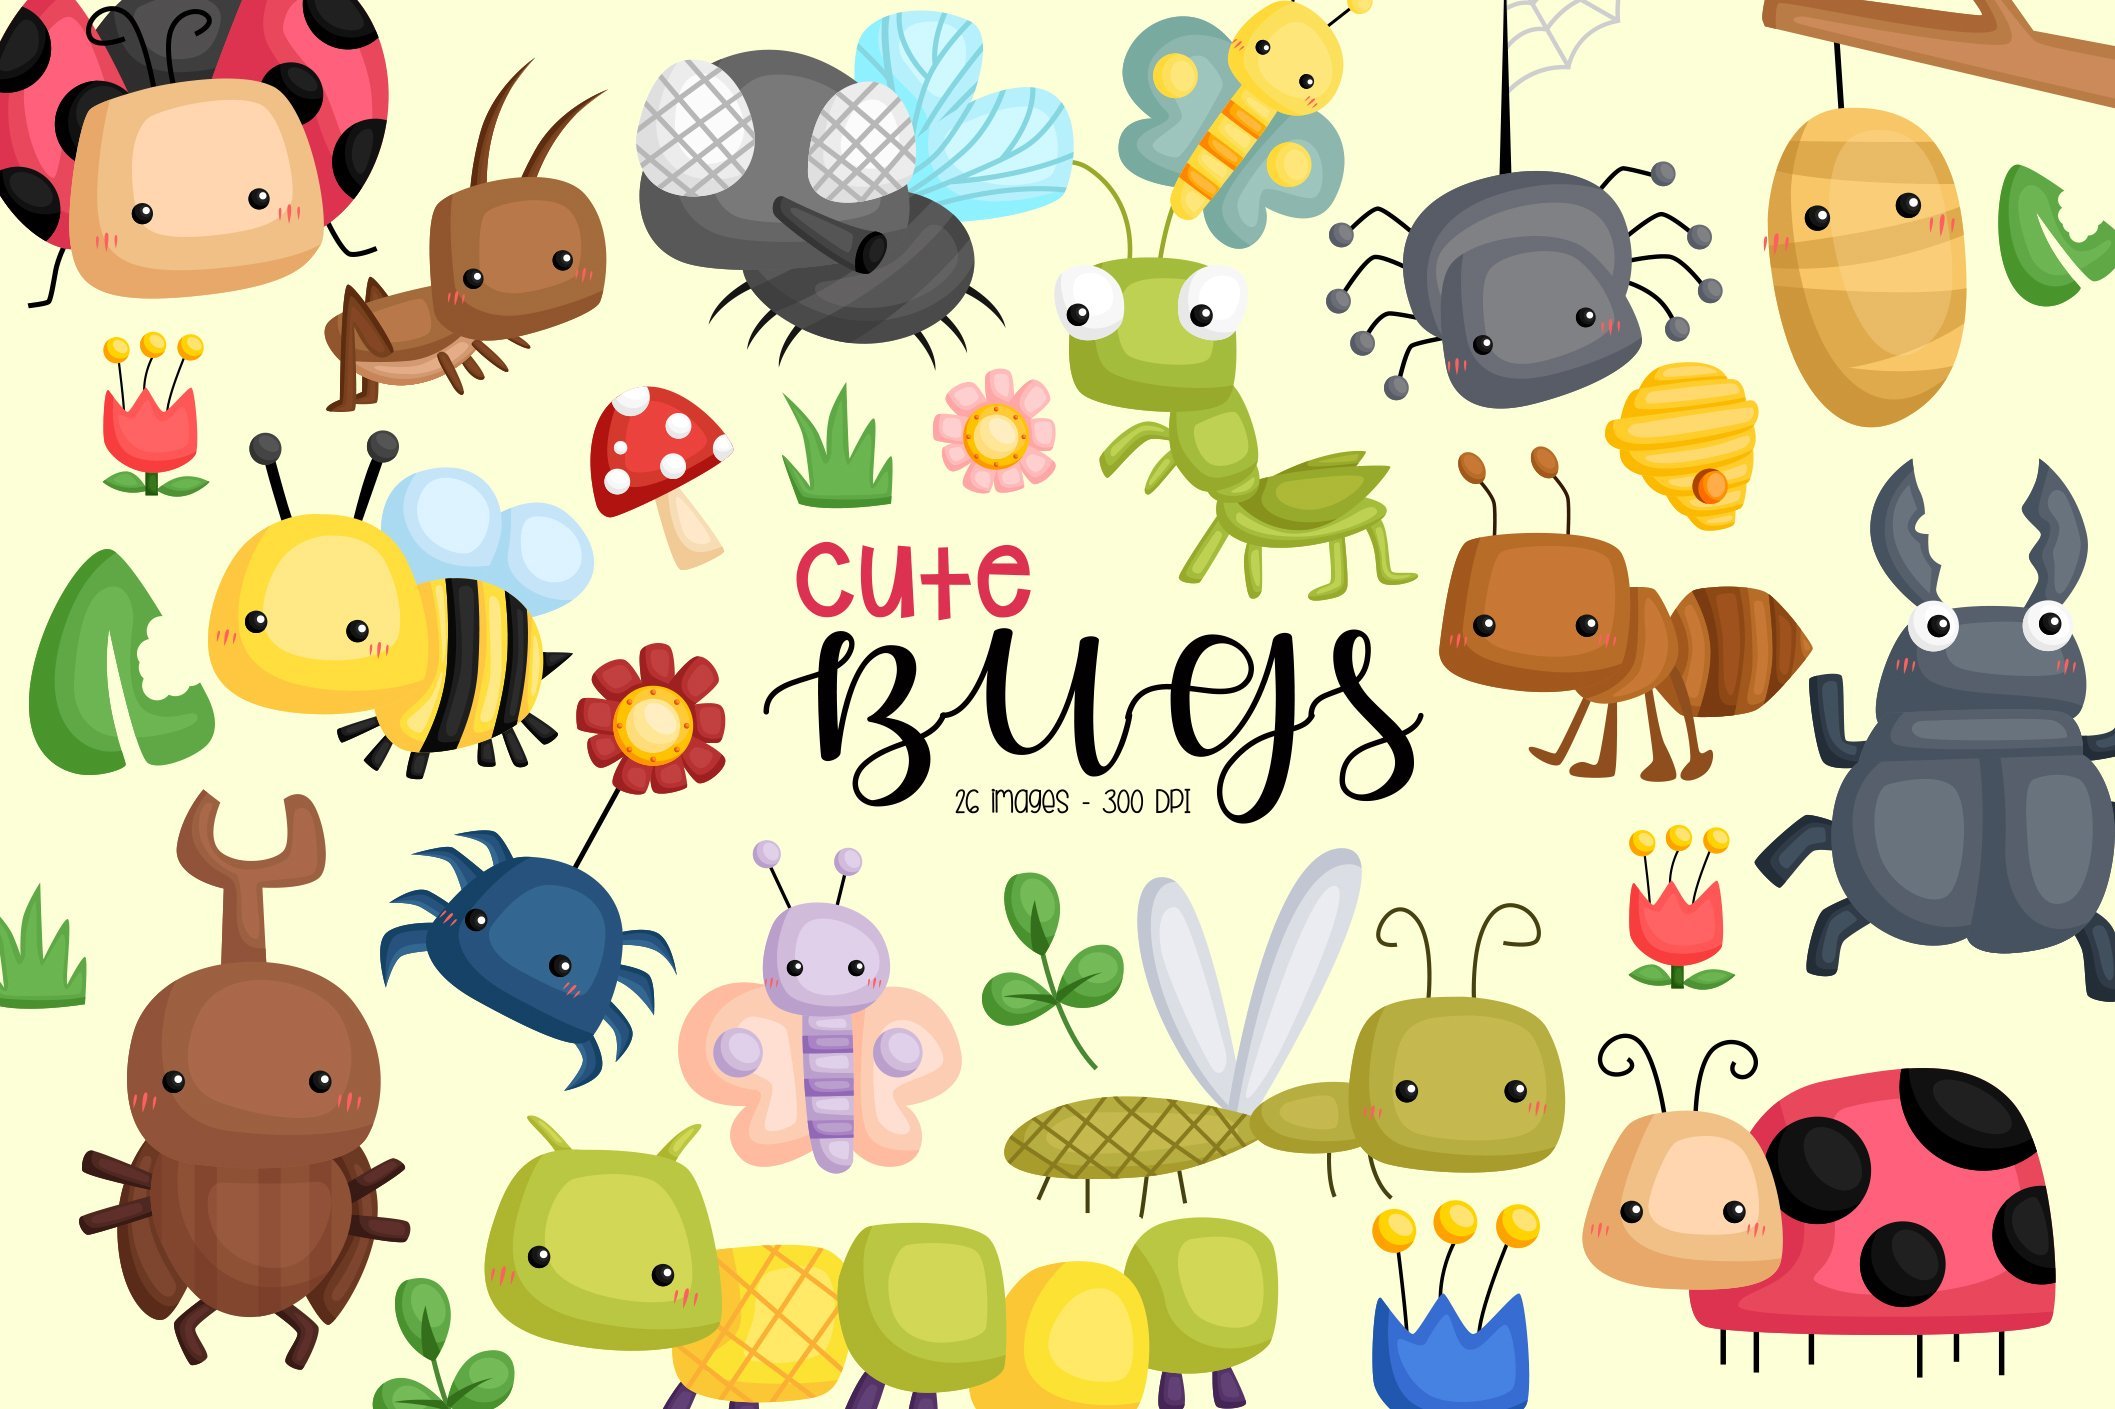 Cute Bugs Clipart - Bugs Types cover image.